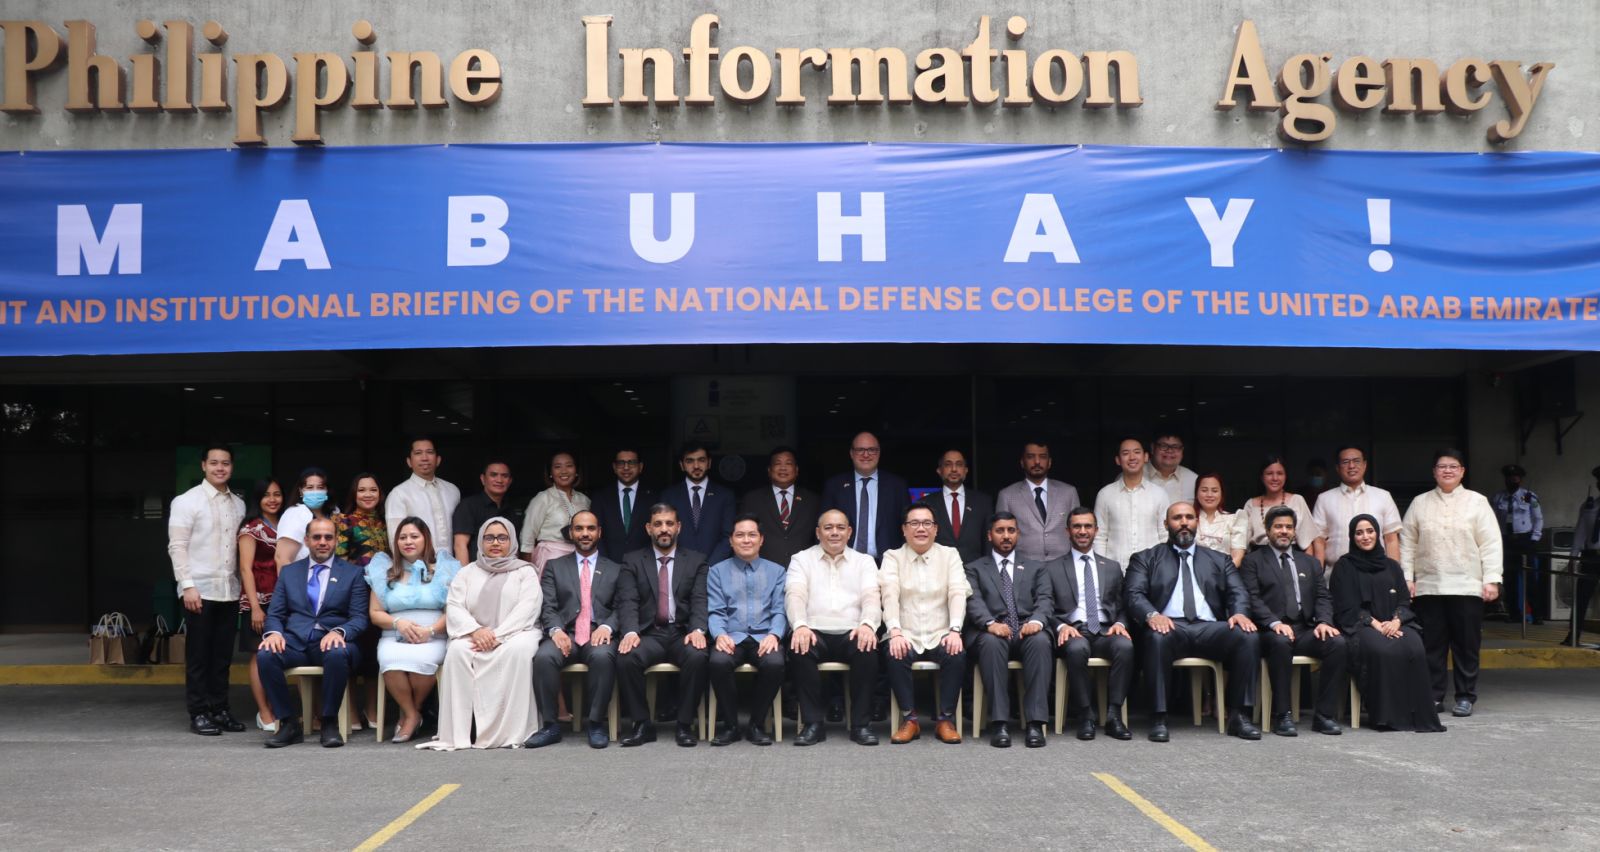 PIA Institutional briefing to the representatives of the National Defense College of the United Arab Emirates